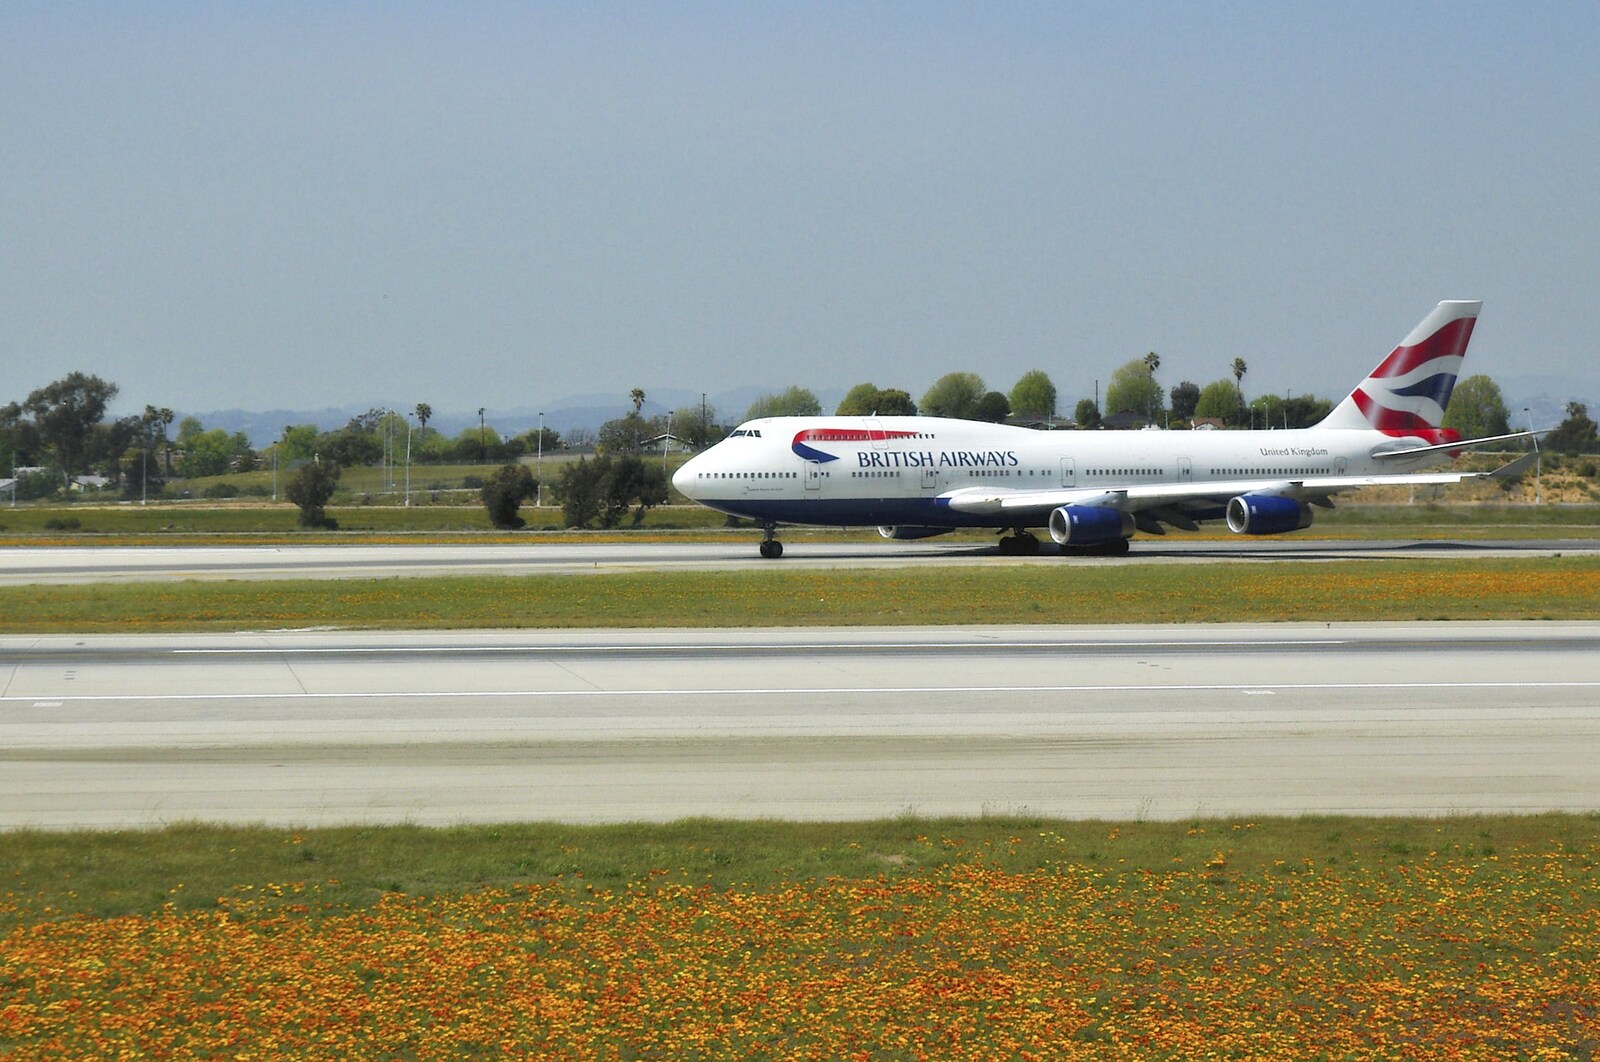 A British Airways 747-400 taxis in at LAX from San Diego Seven: The Desert and the Dunes, Arizona and California, US - 22nd April